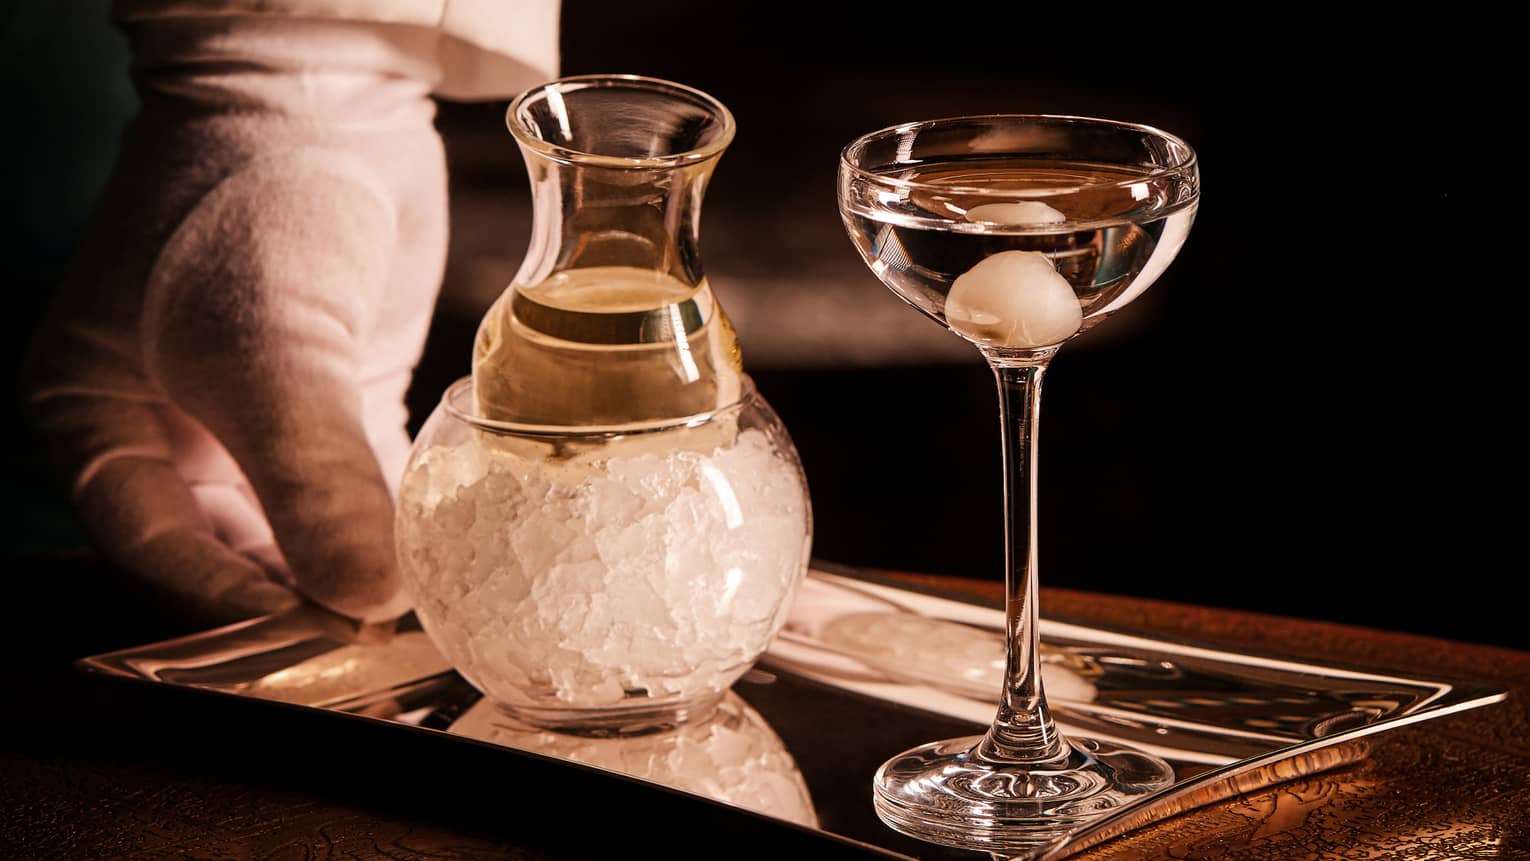 Gloved hand holds a small, mirrored tray with a dainty ice-chilled carafe and a full stemmed, onion-garnished cocktail glass.